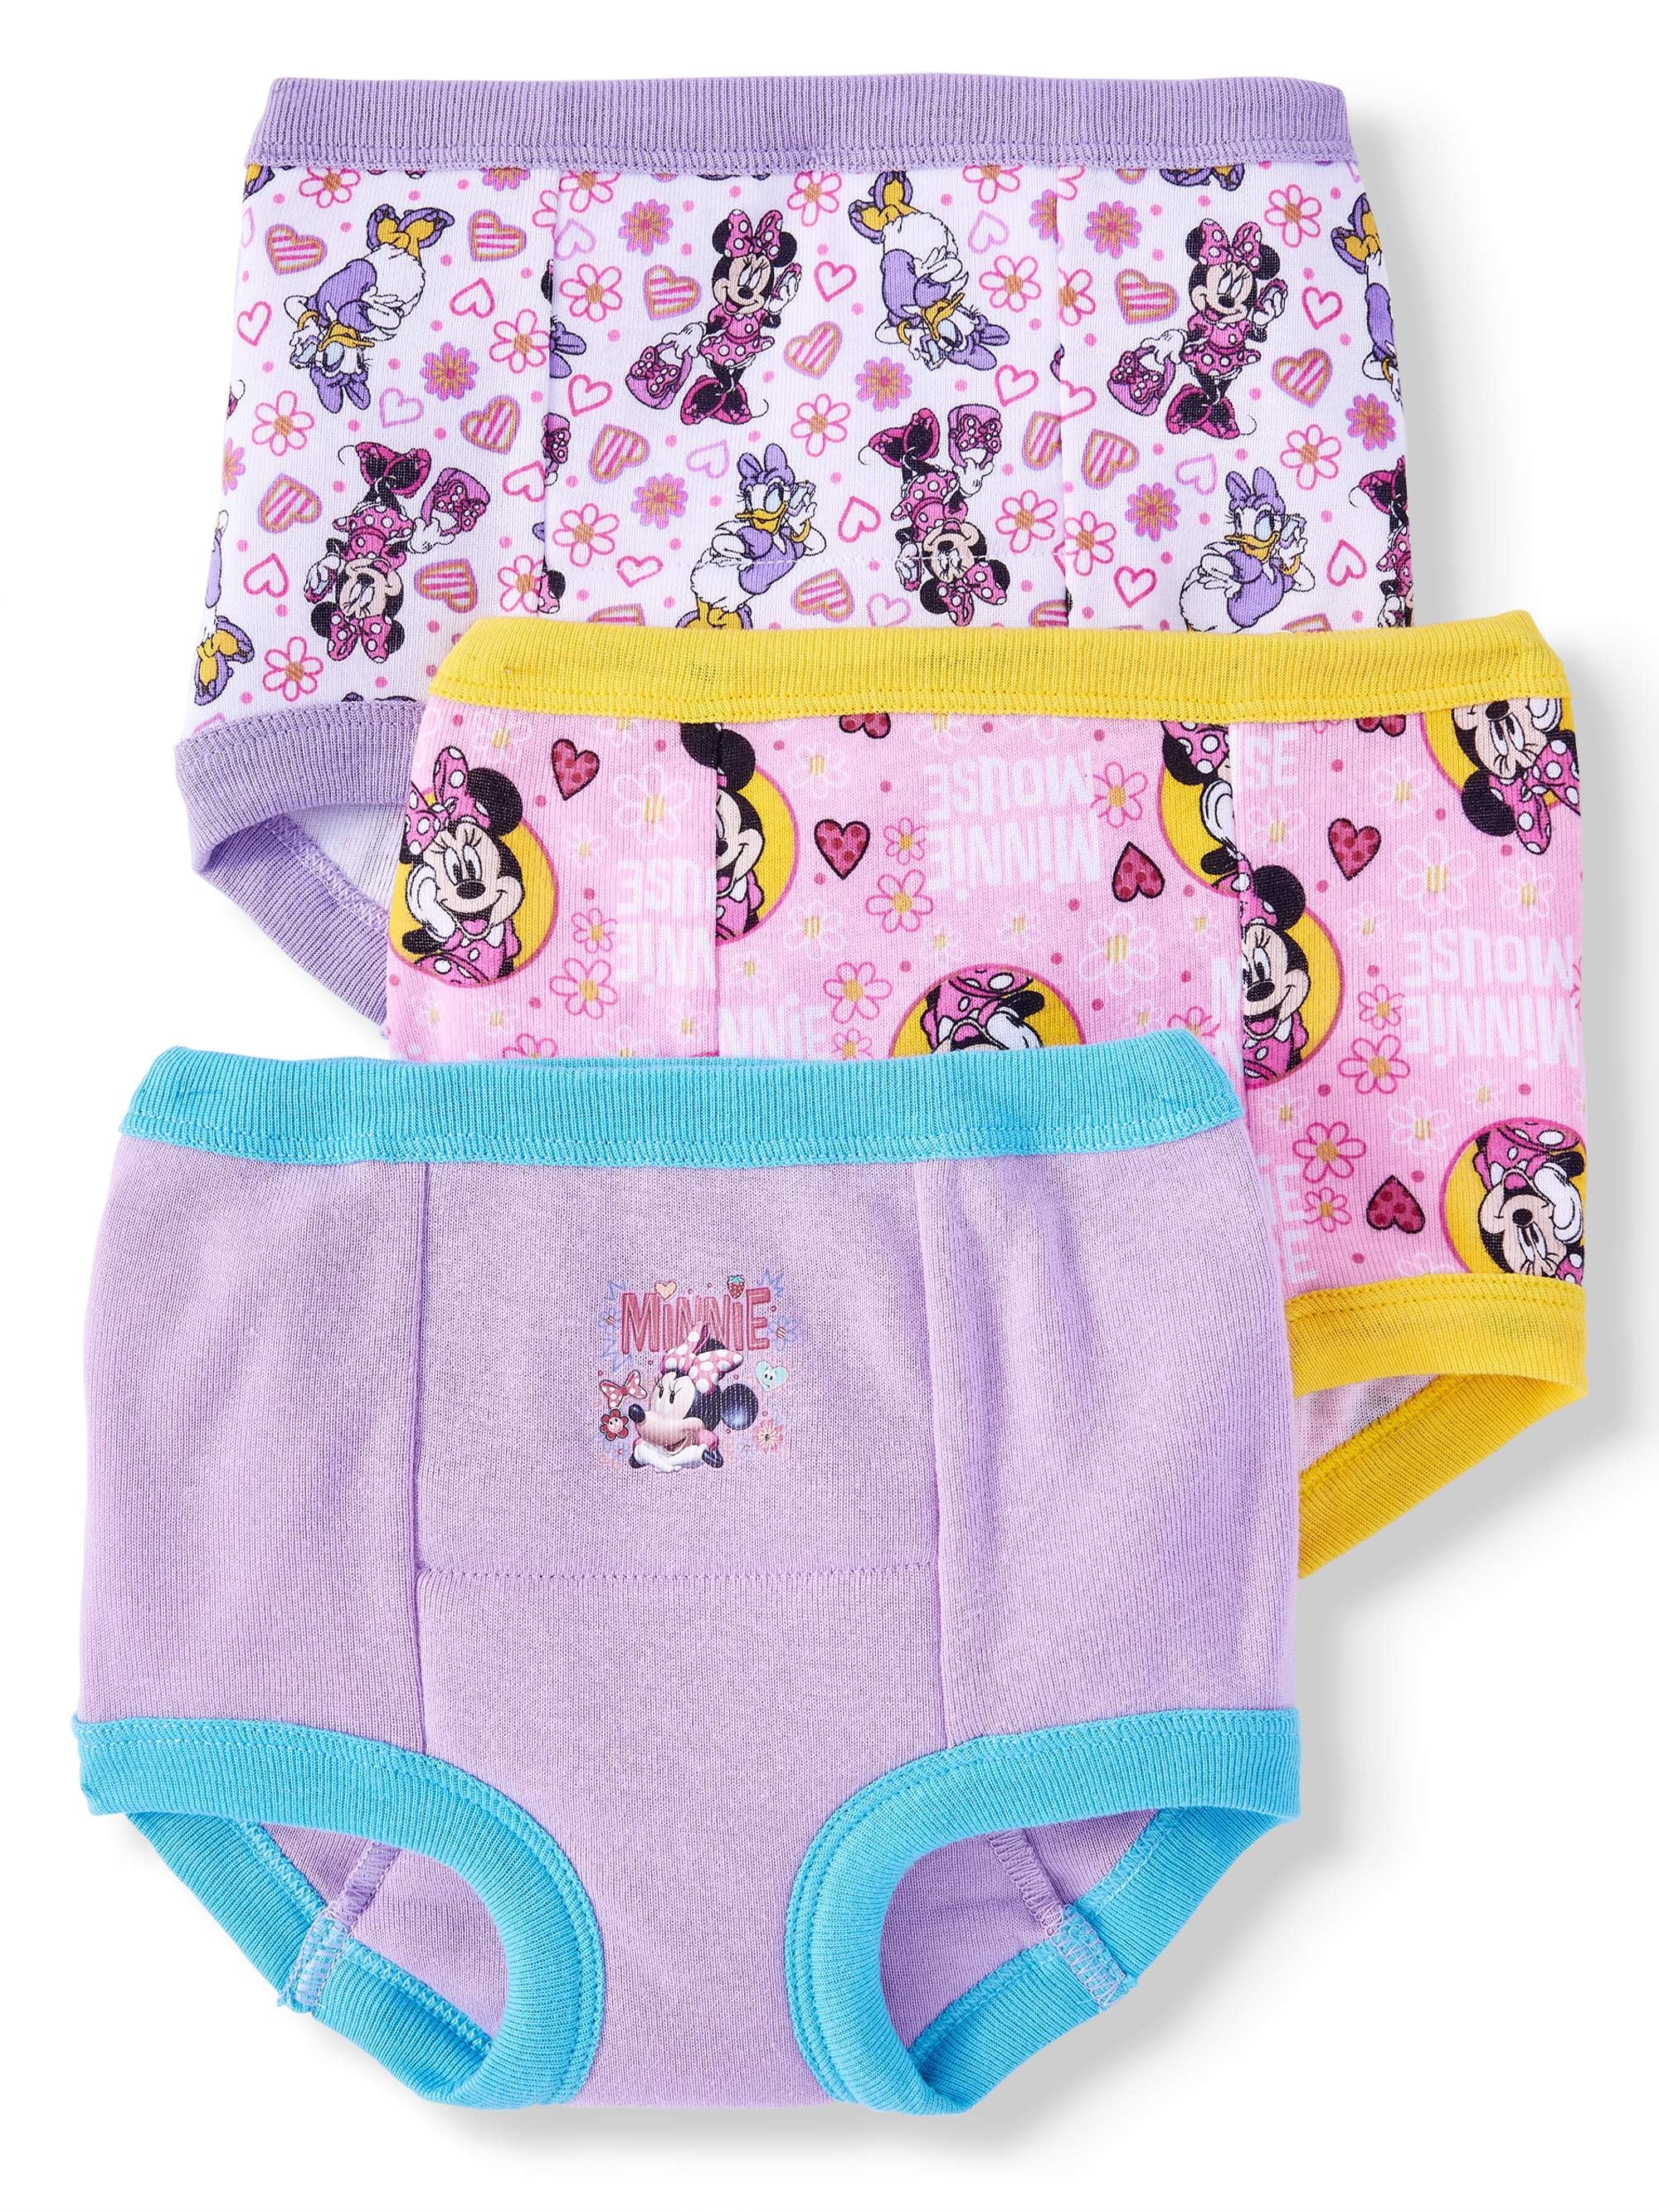 Buy Disney Girls' Minnie Mouse Underwear Multipacks with Assorted Prints in  Sizes 2/3t, 4t, 4, 6, 8 and 10